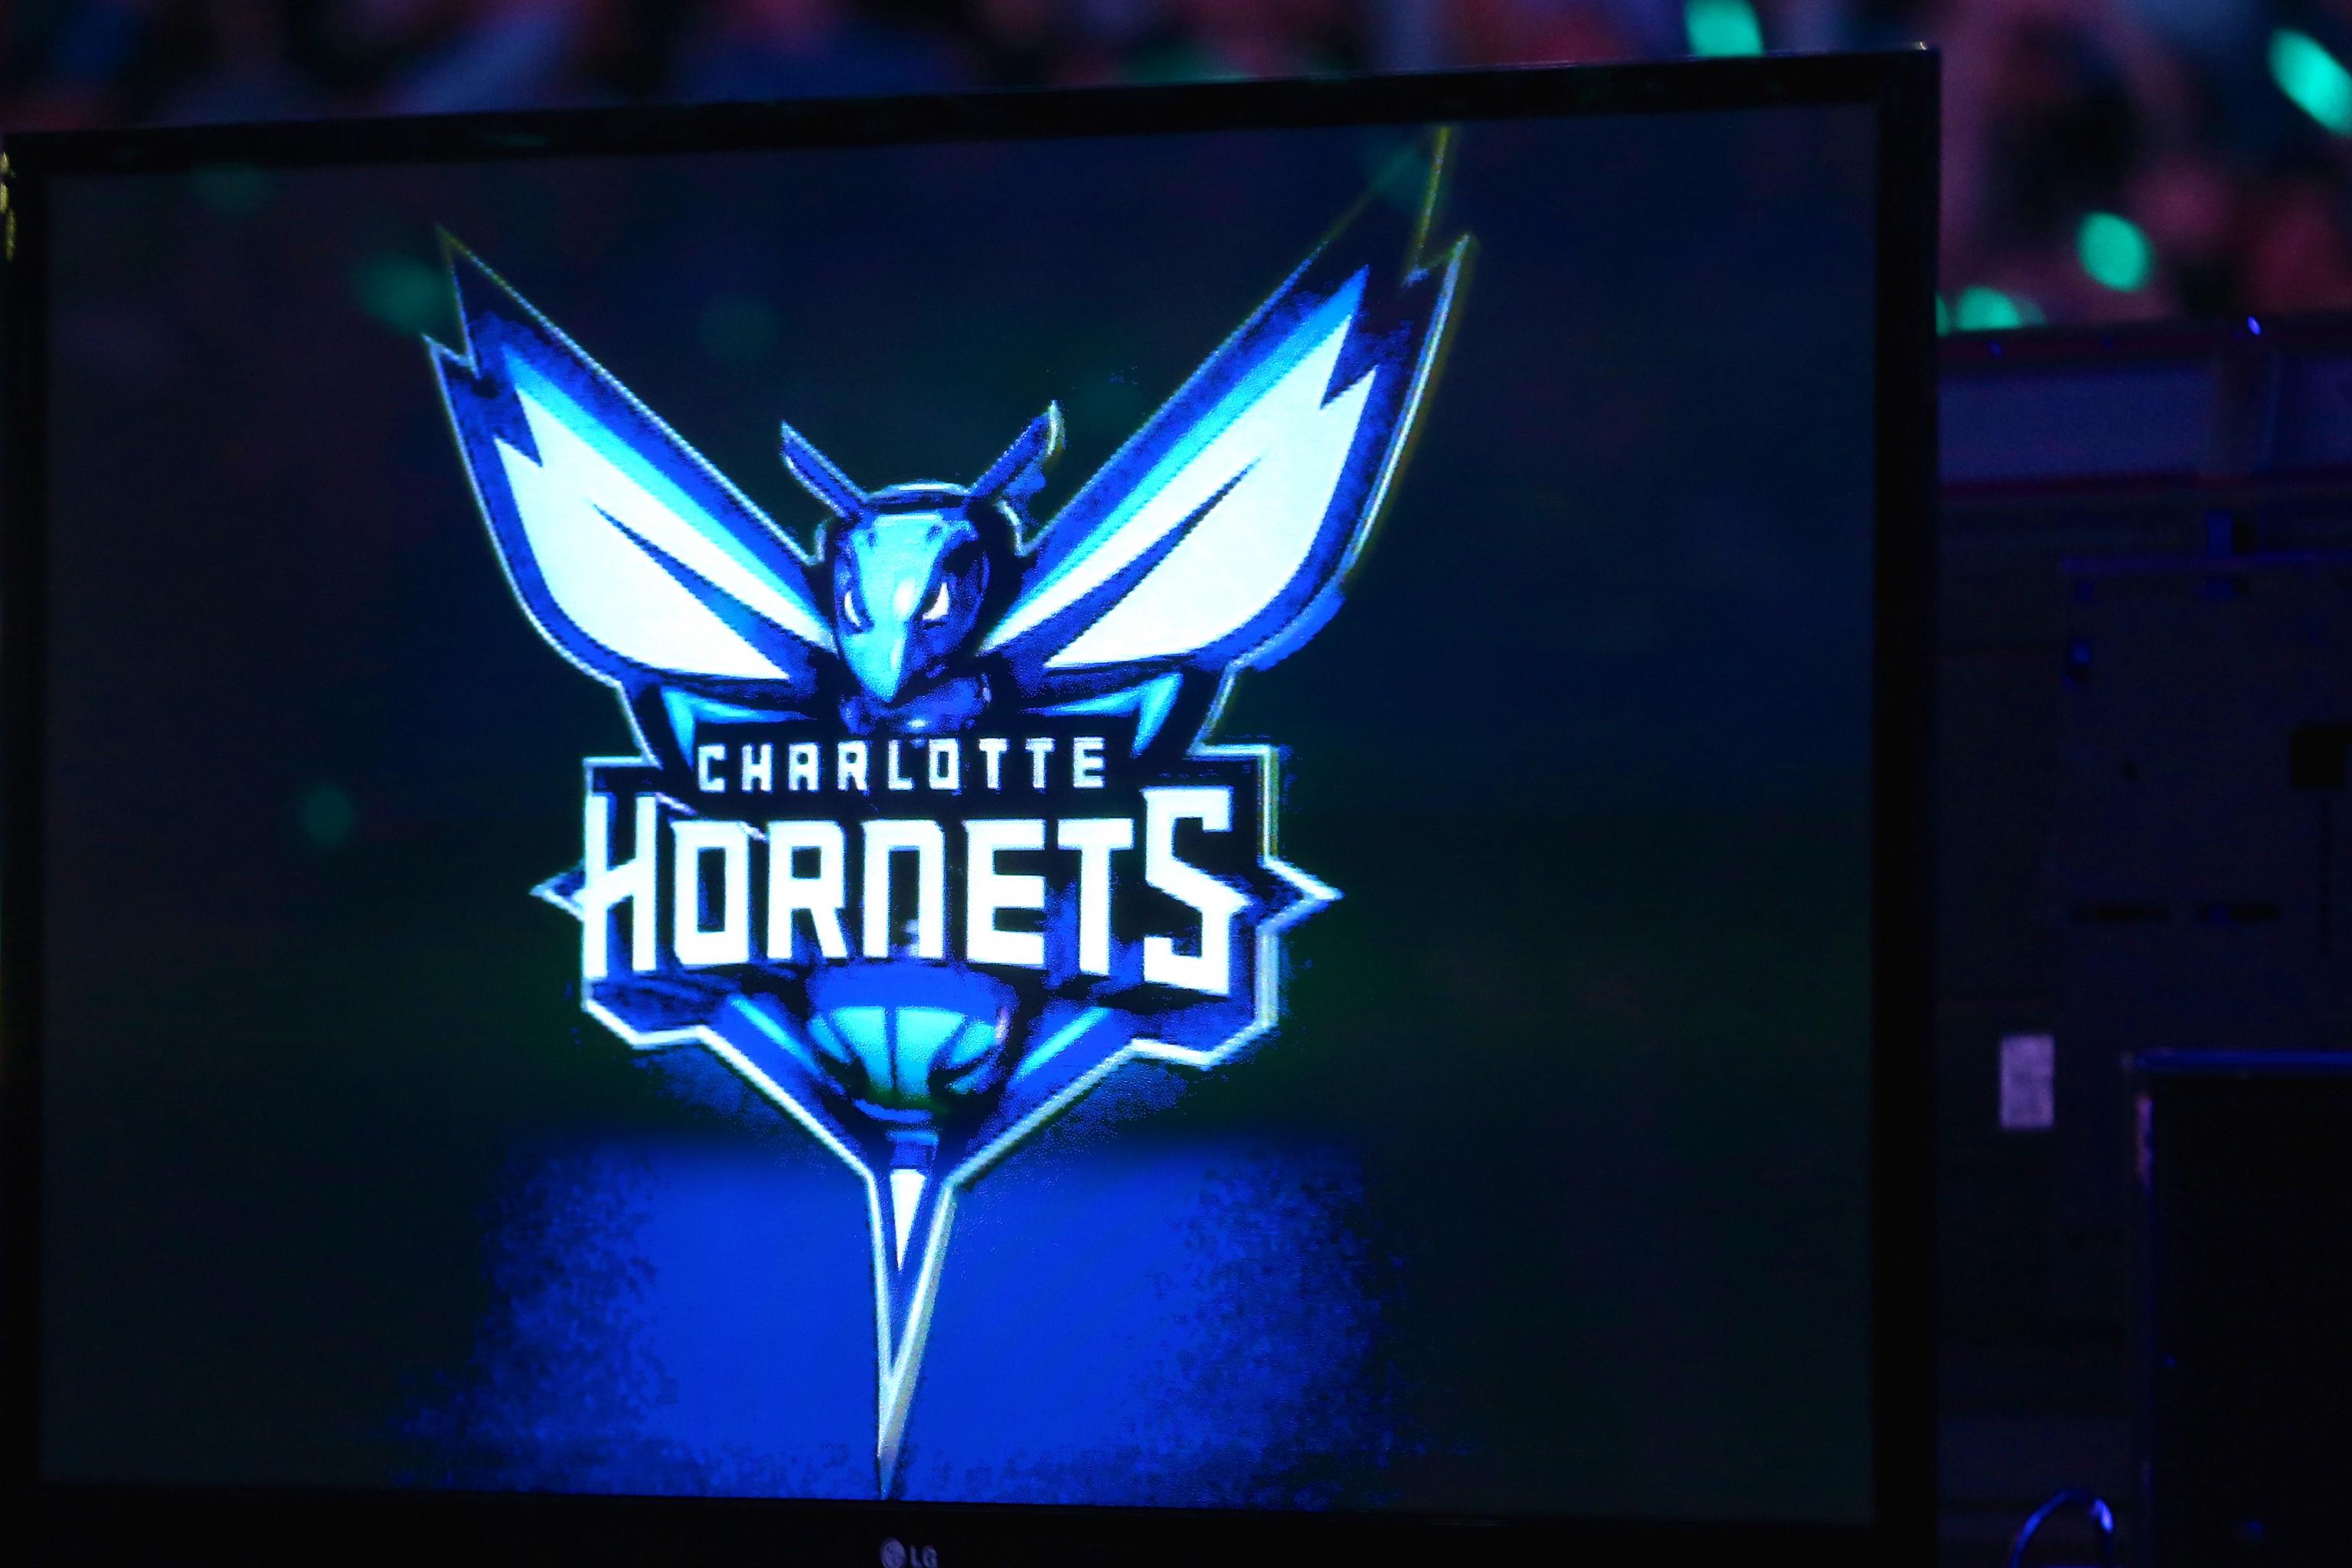 Charlotte Hornets unveil first new jersey redesign since 2014 rebrand - ESPN